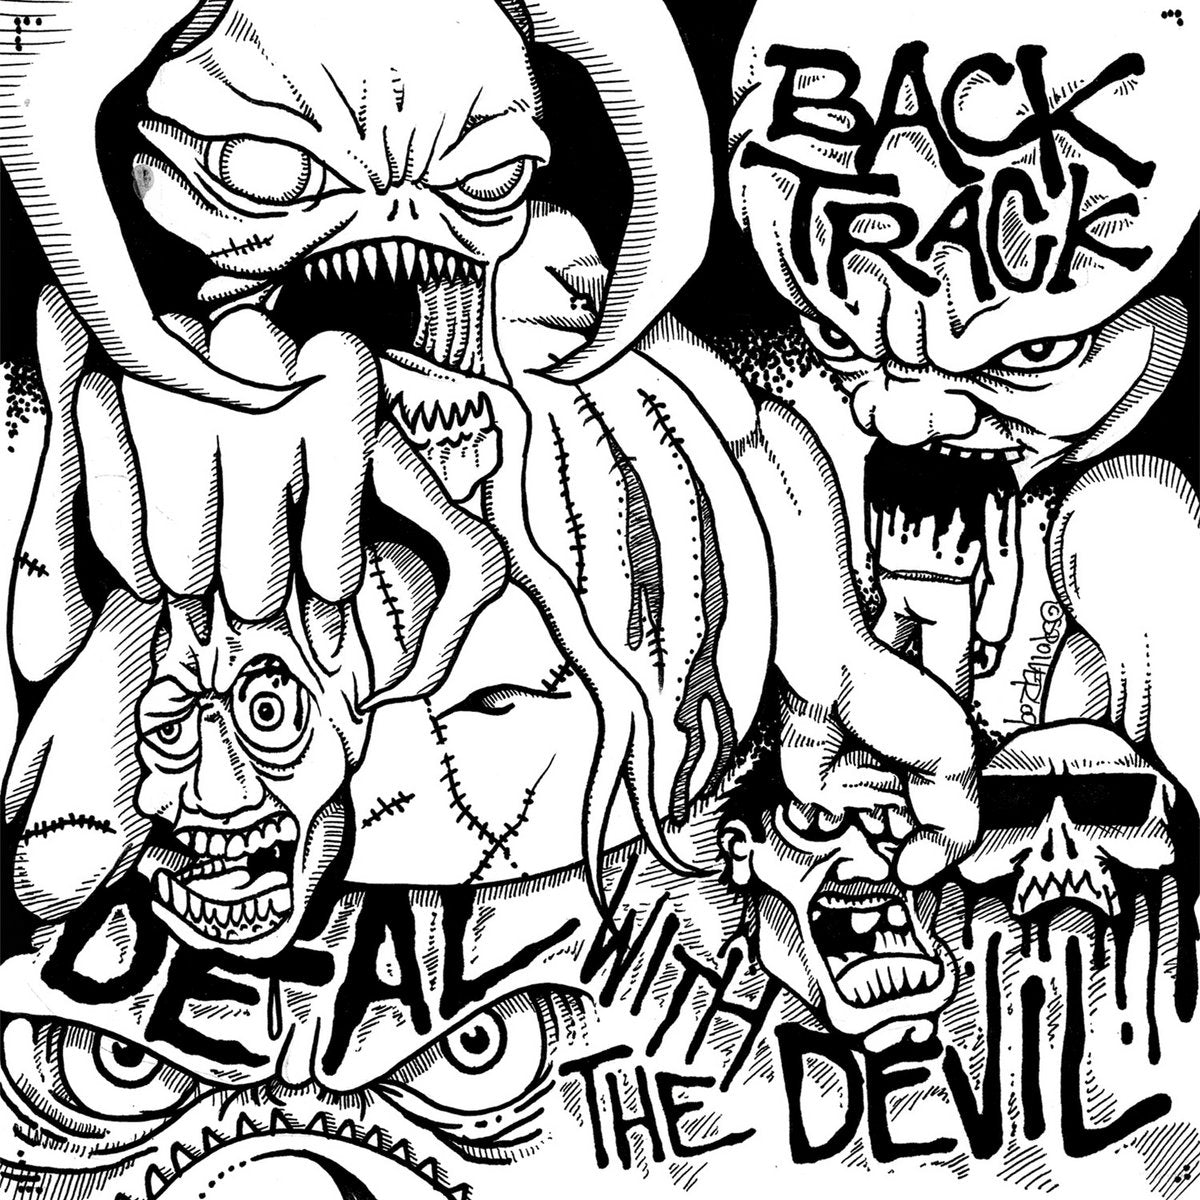 Backtrack "Deal With The Devil" 7"